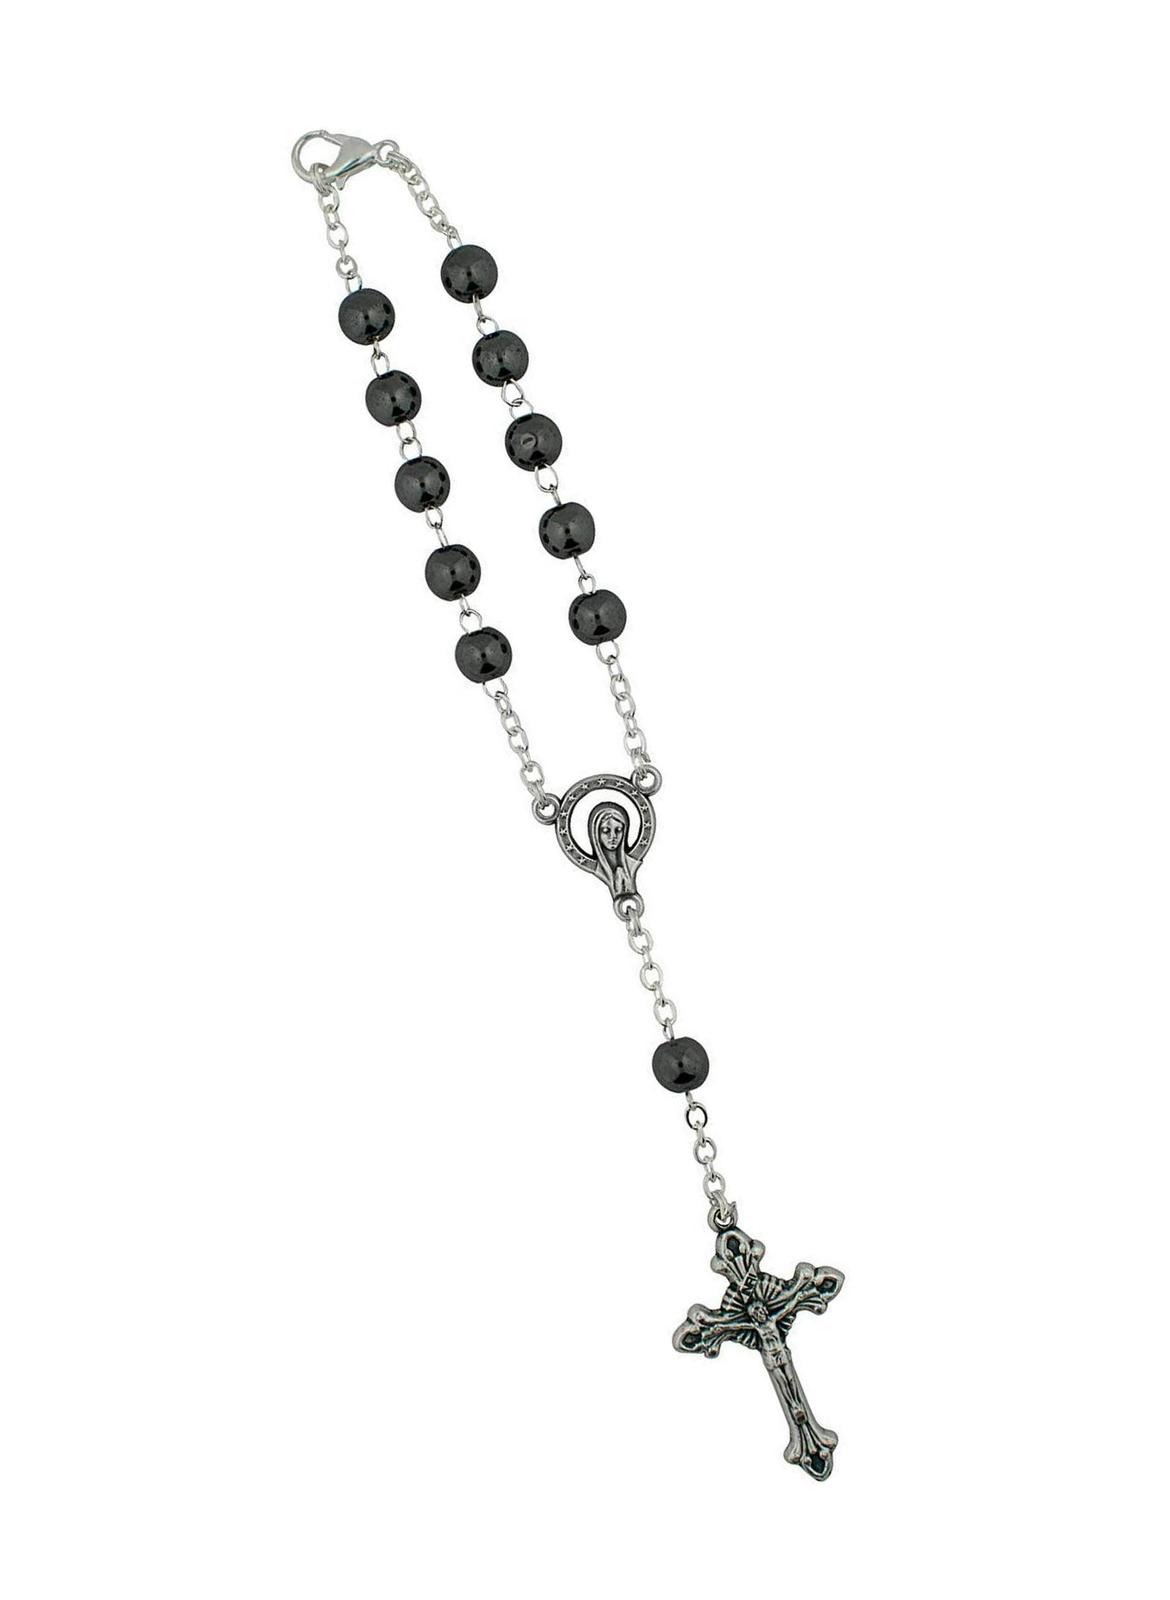 Primary image for Rosary with Clasp | Hangs on Rear View Mirror | Wood